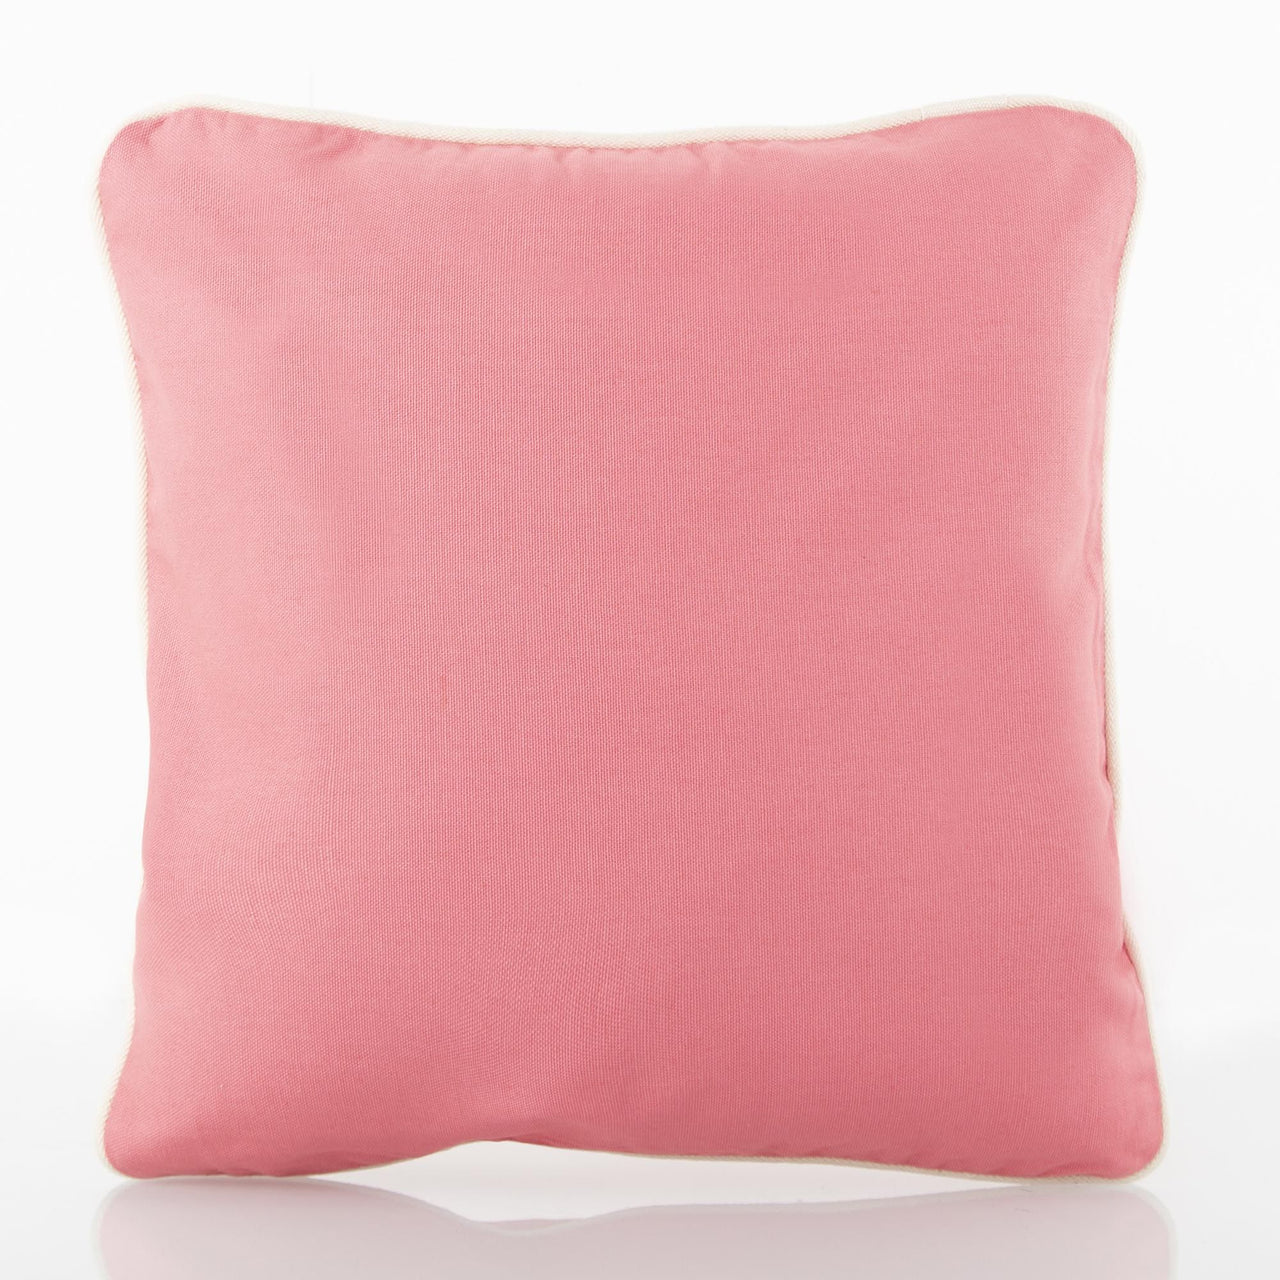 Baby Pillow Pink with White Trim